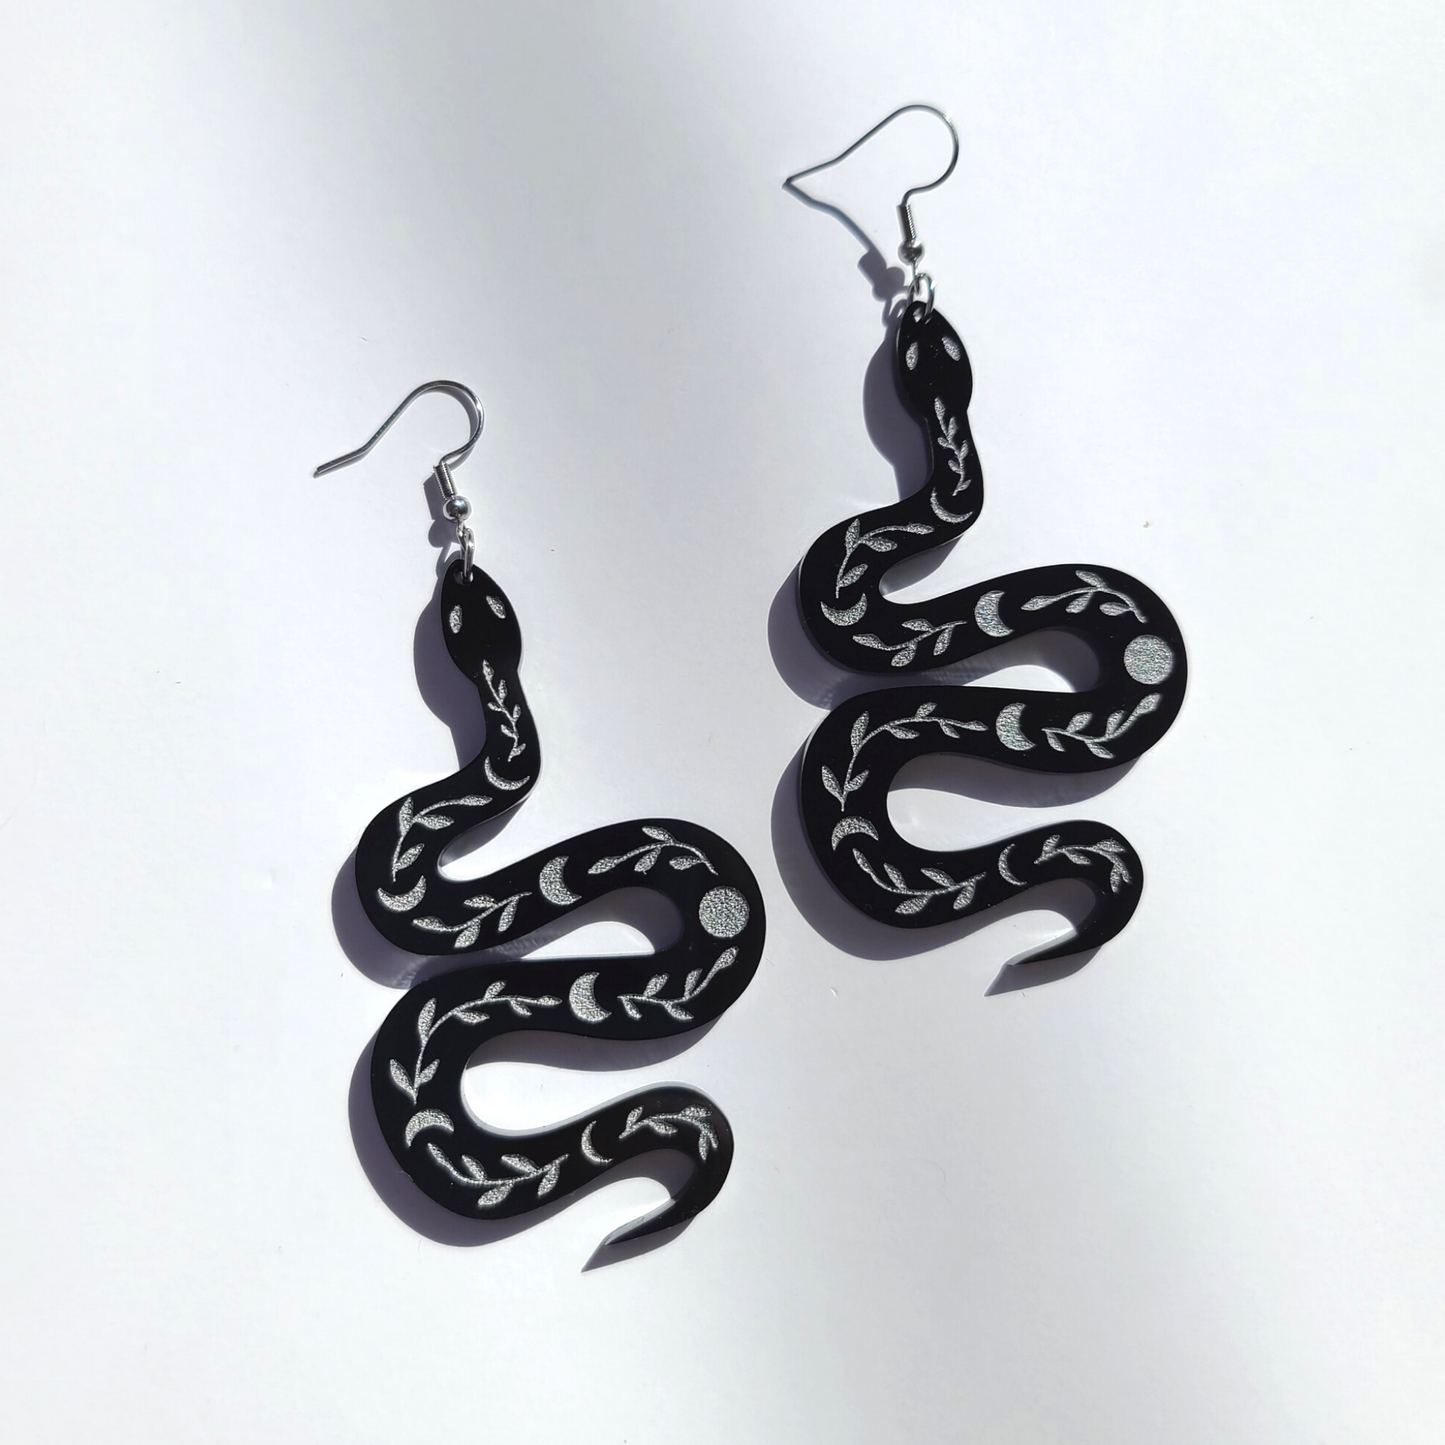 Celestial Snakes with Silver Details - Earrings - Laser Cut